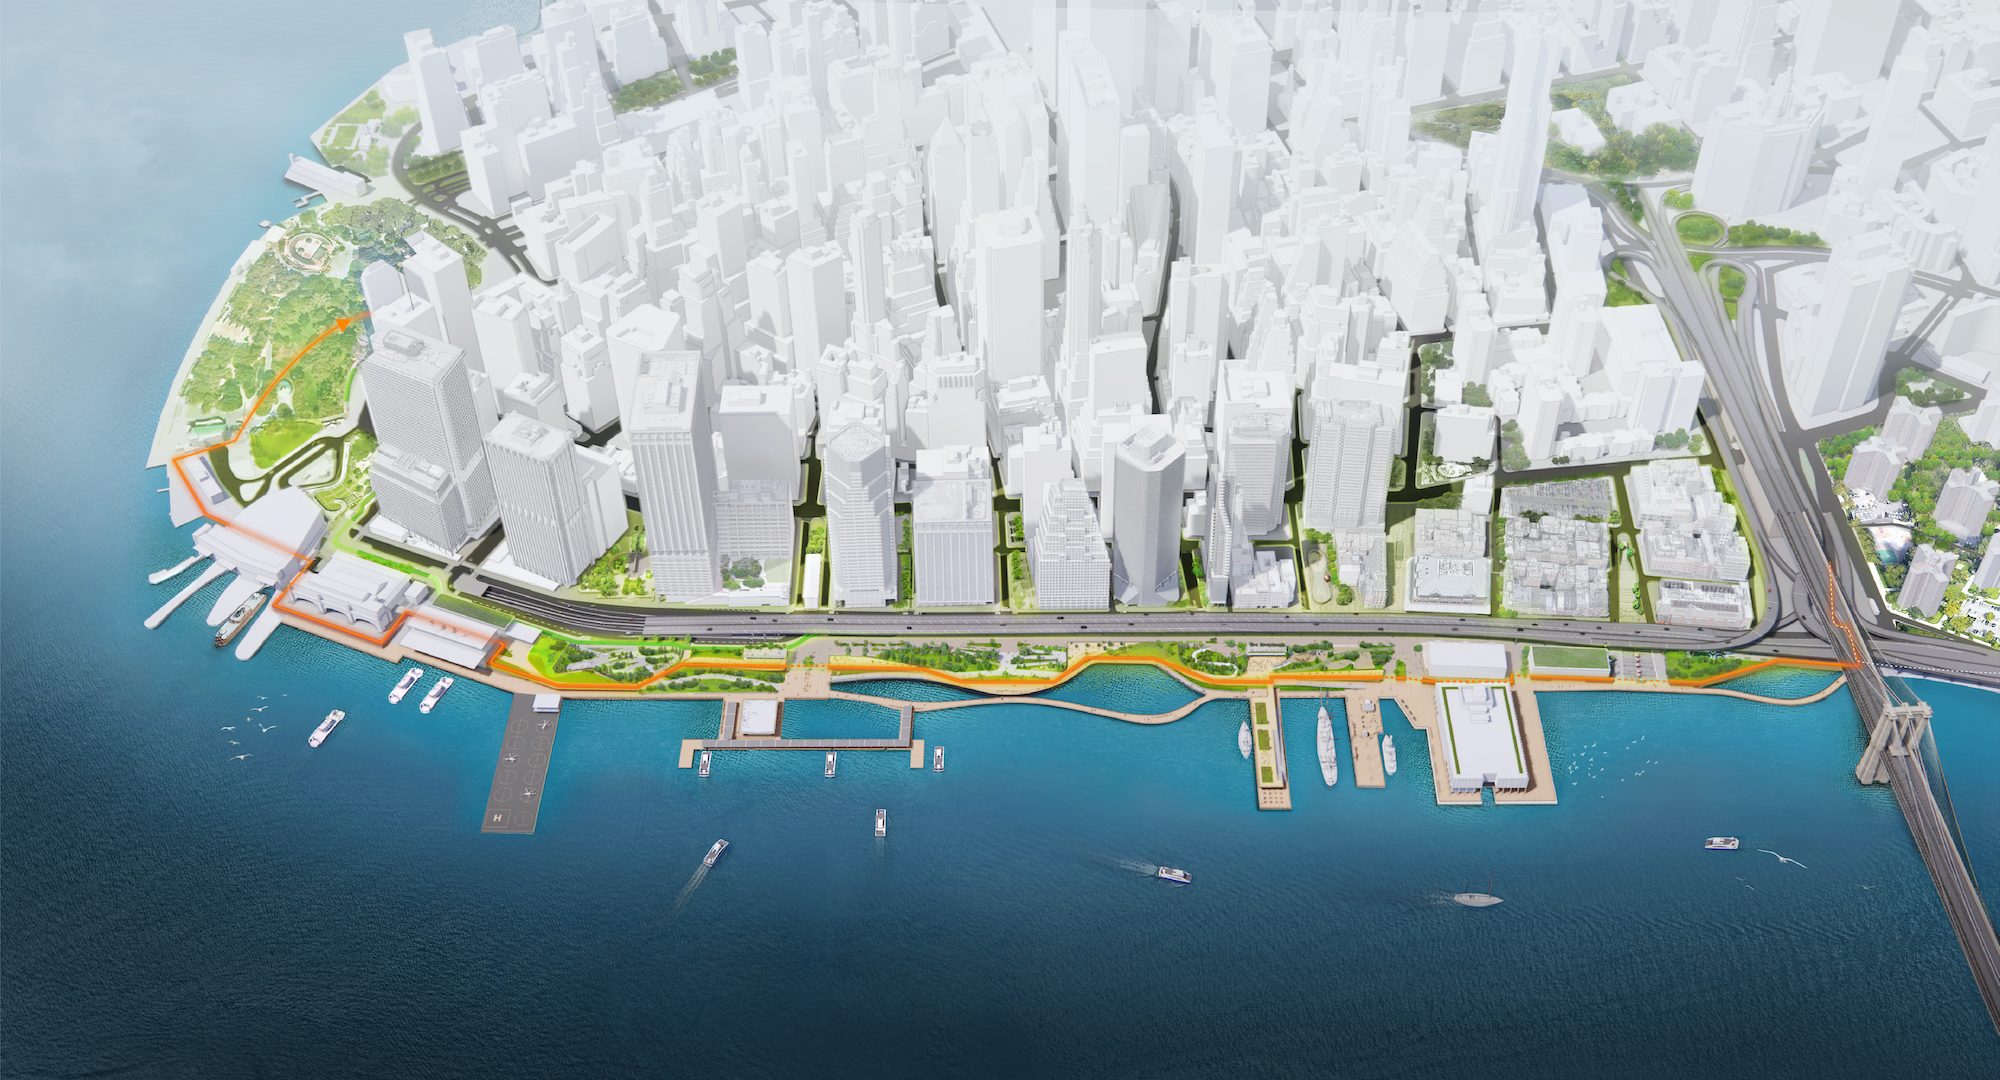 NYC's Developers Plow Ahead With Ambitious Plans to Reshape City - Bloomberg